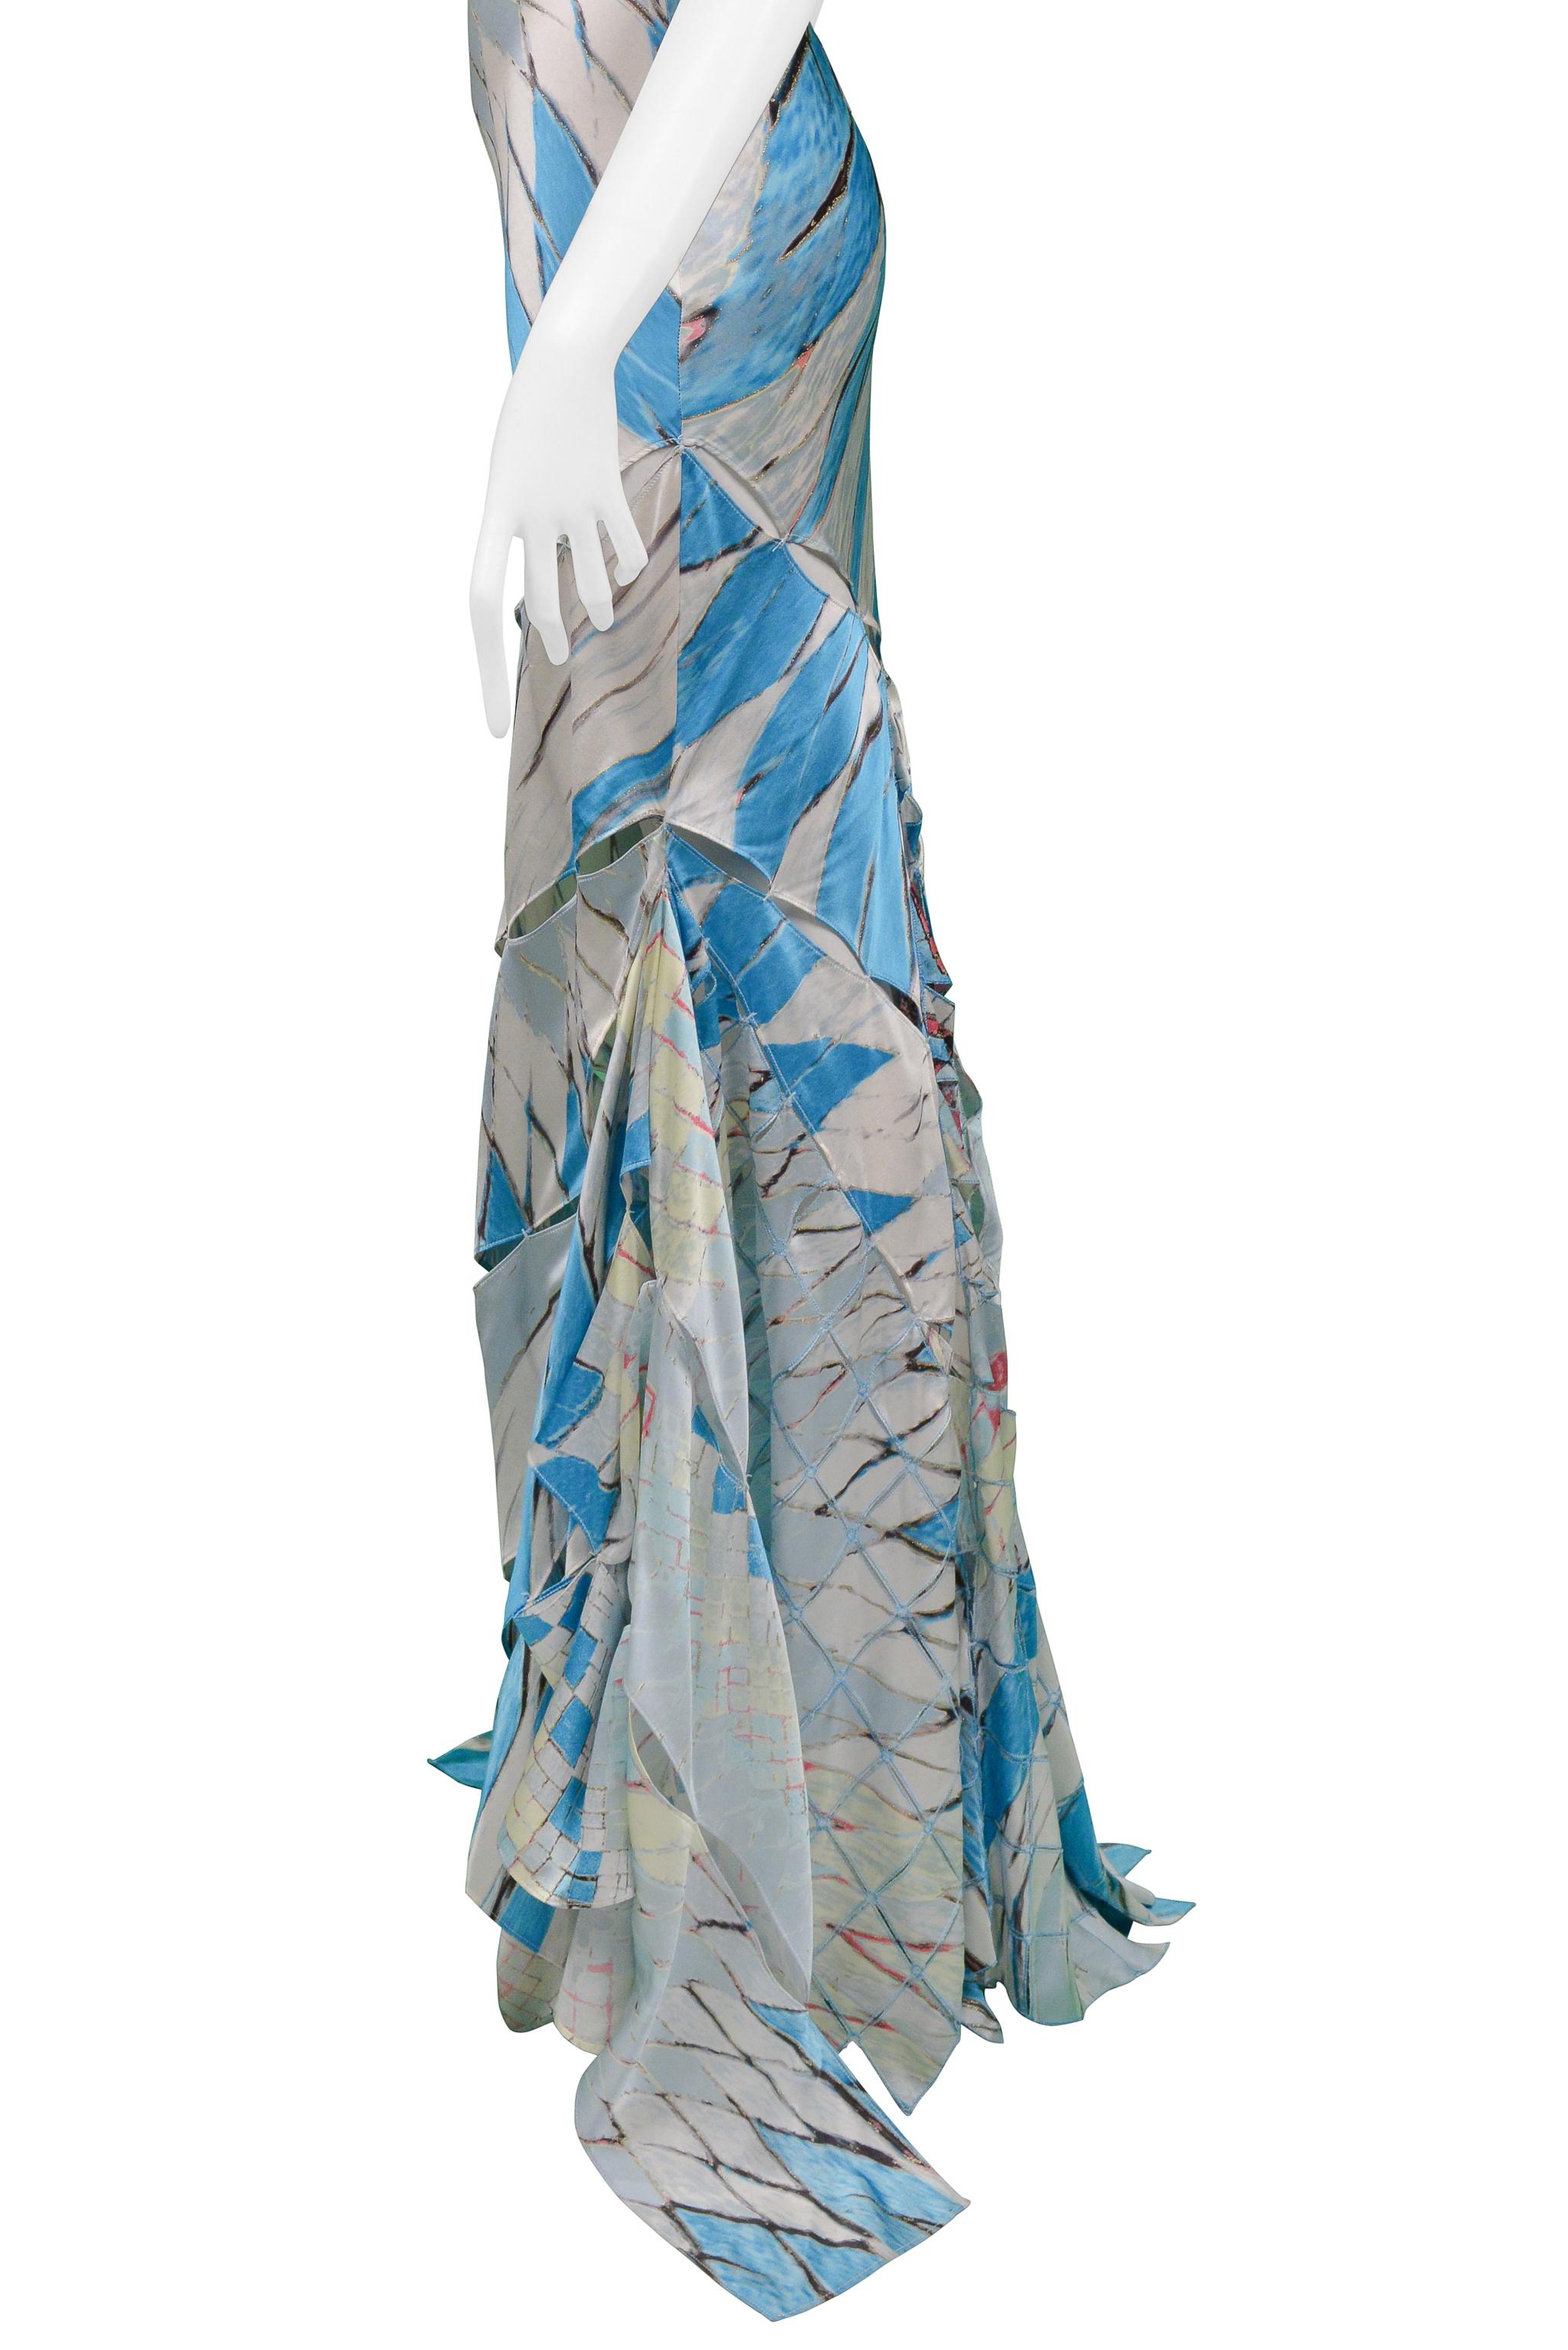 Roberto Cavalli Multicolor Stained Glass Print Gown With Cutout Slashes 2004 For Sale 1